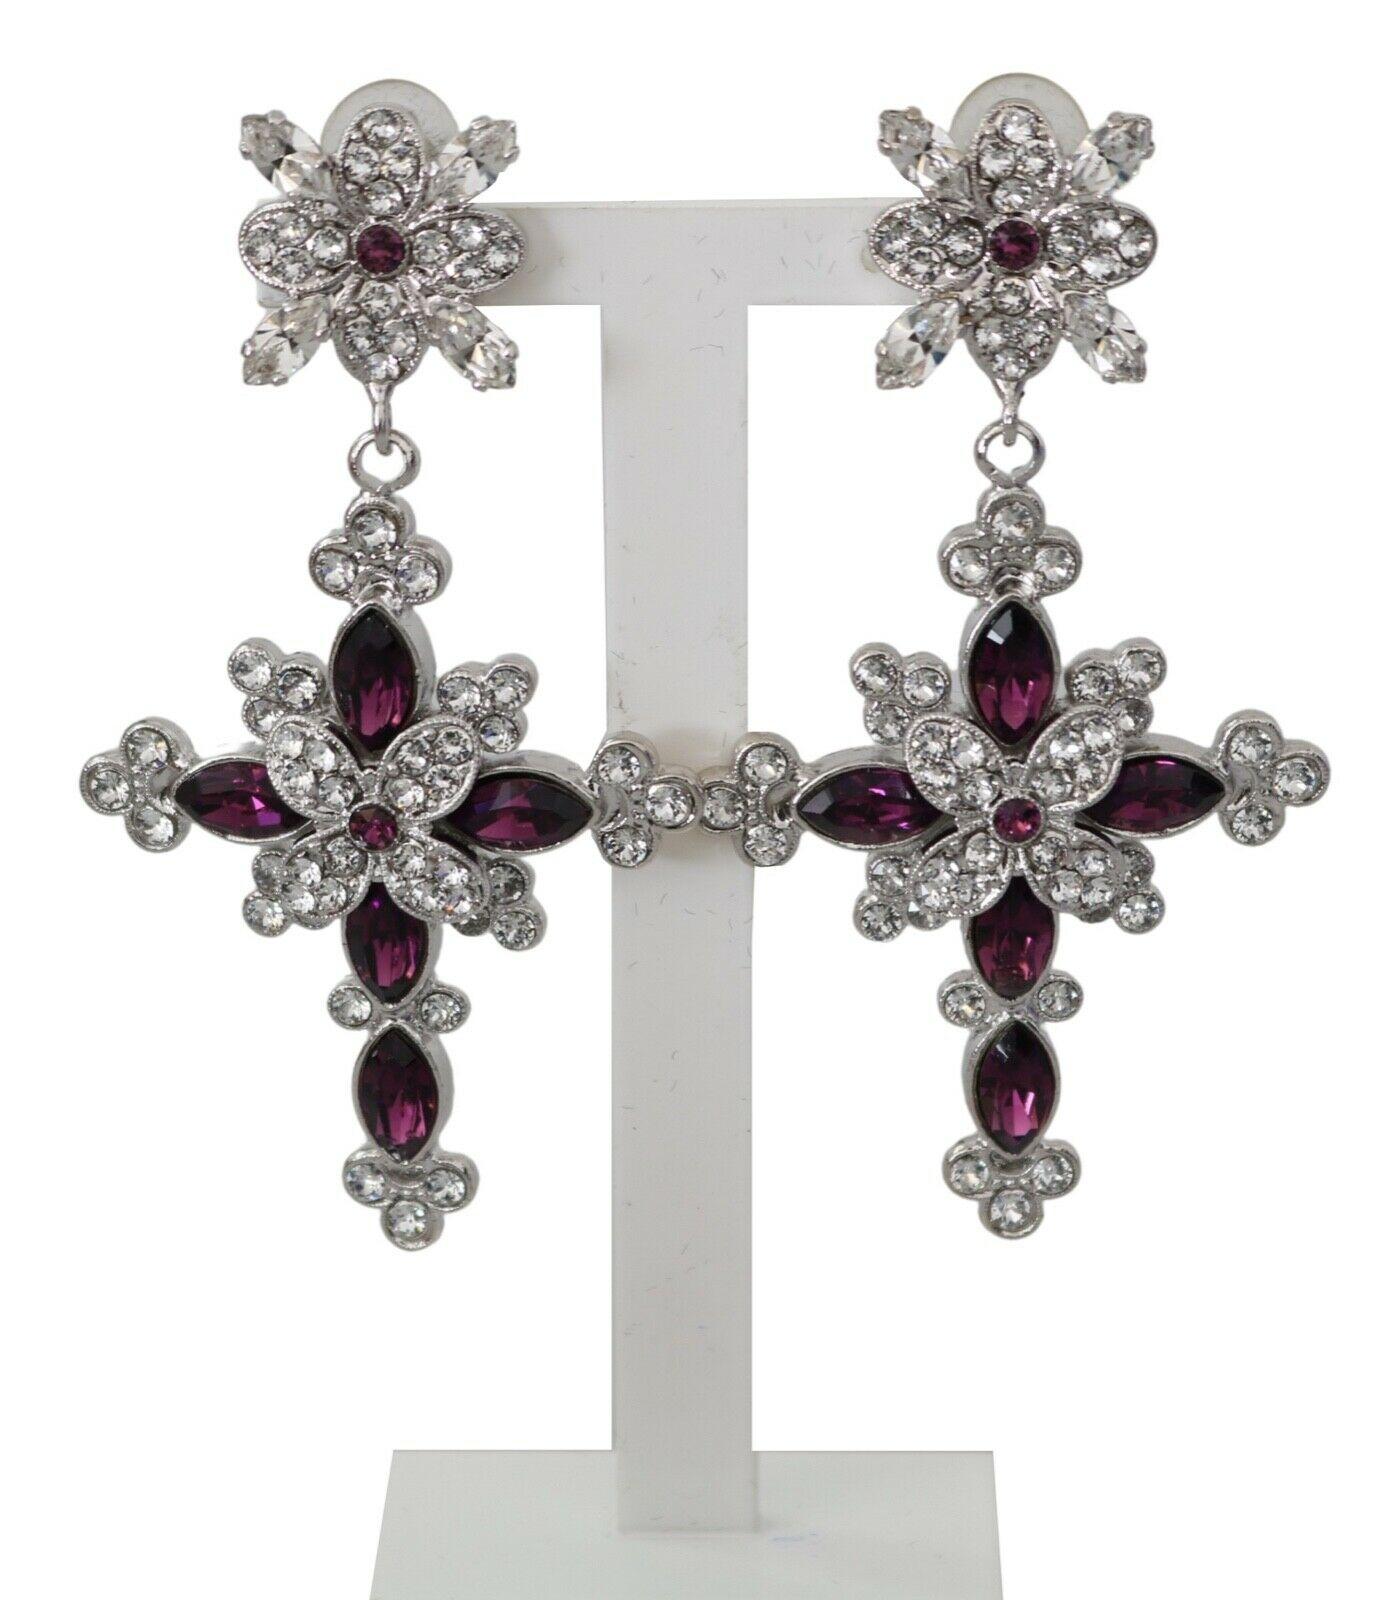  Gorgeous brand new with tags, 100% Authentic Dolce & Gabbana silver-colored, cross-shaped earrings made of lightweight electroplated brass. The model is adorned with sparkling transparent and lilac Swarovski crystals. Wear it as a set or paired